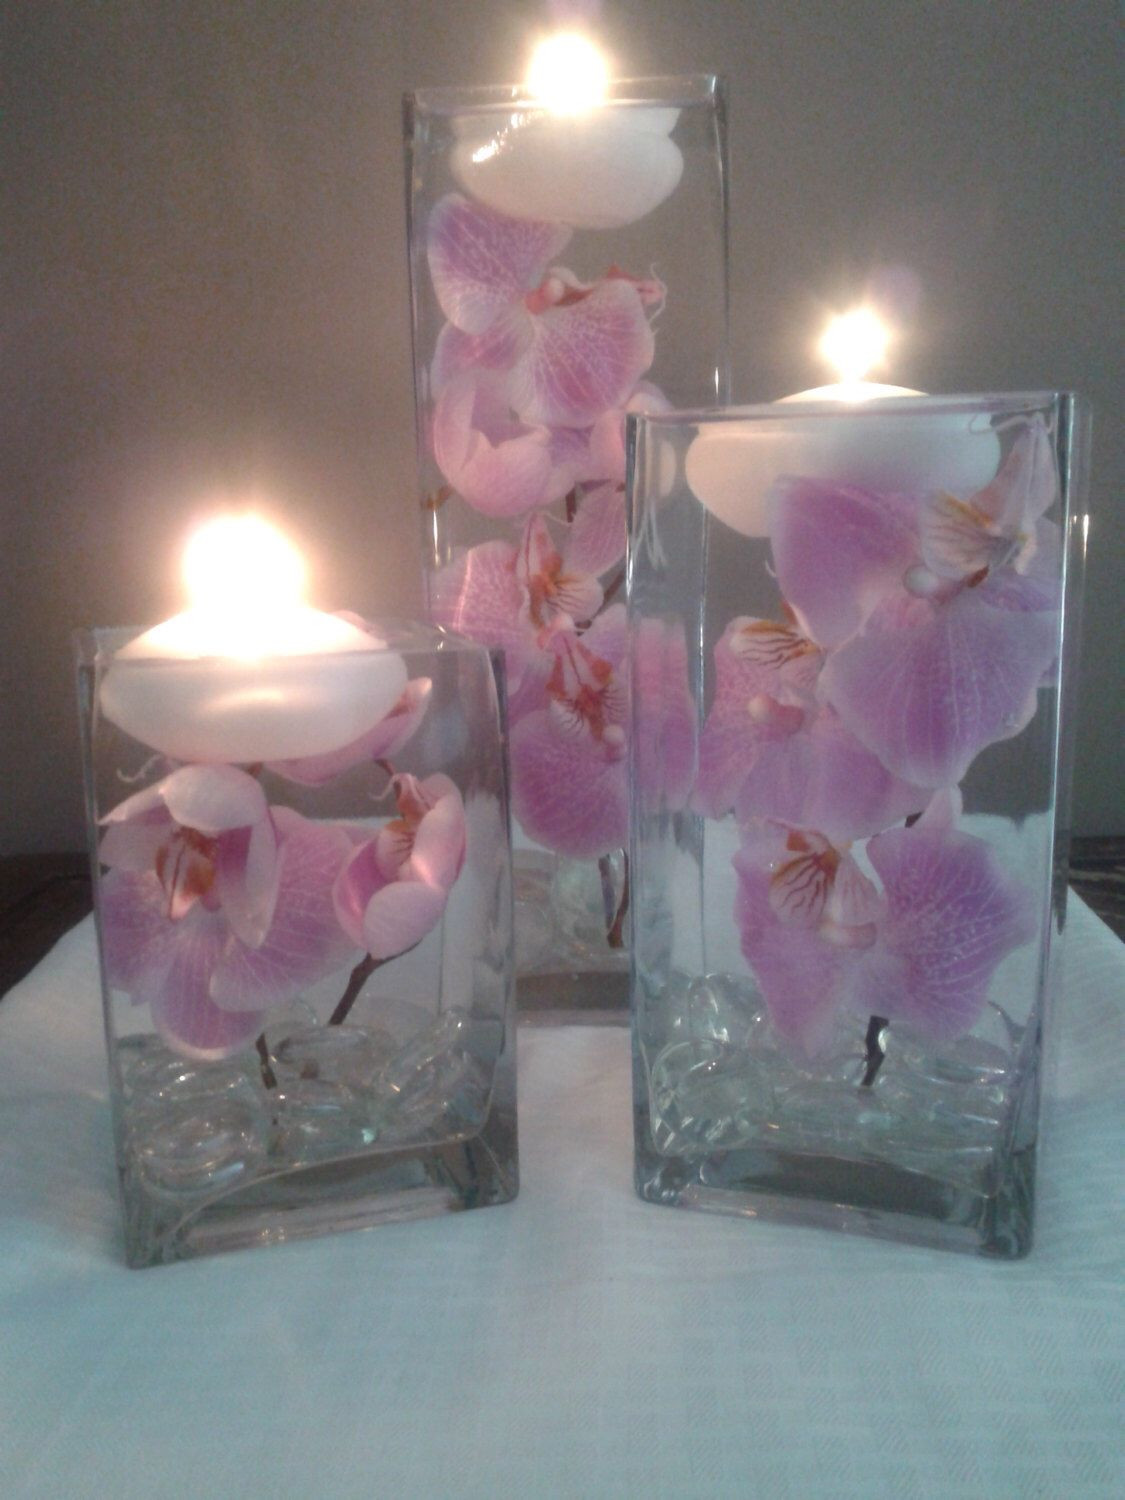 26 Cute Square Vases Set Of 3 2023 free download square vases set of 3 of a set of three square vases with purple orchids floating in water inside a set of three square vases with purple orchids floating in water perfect for unique wedding